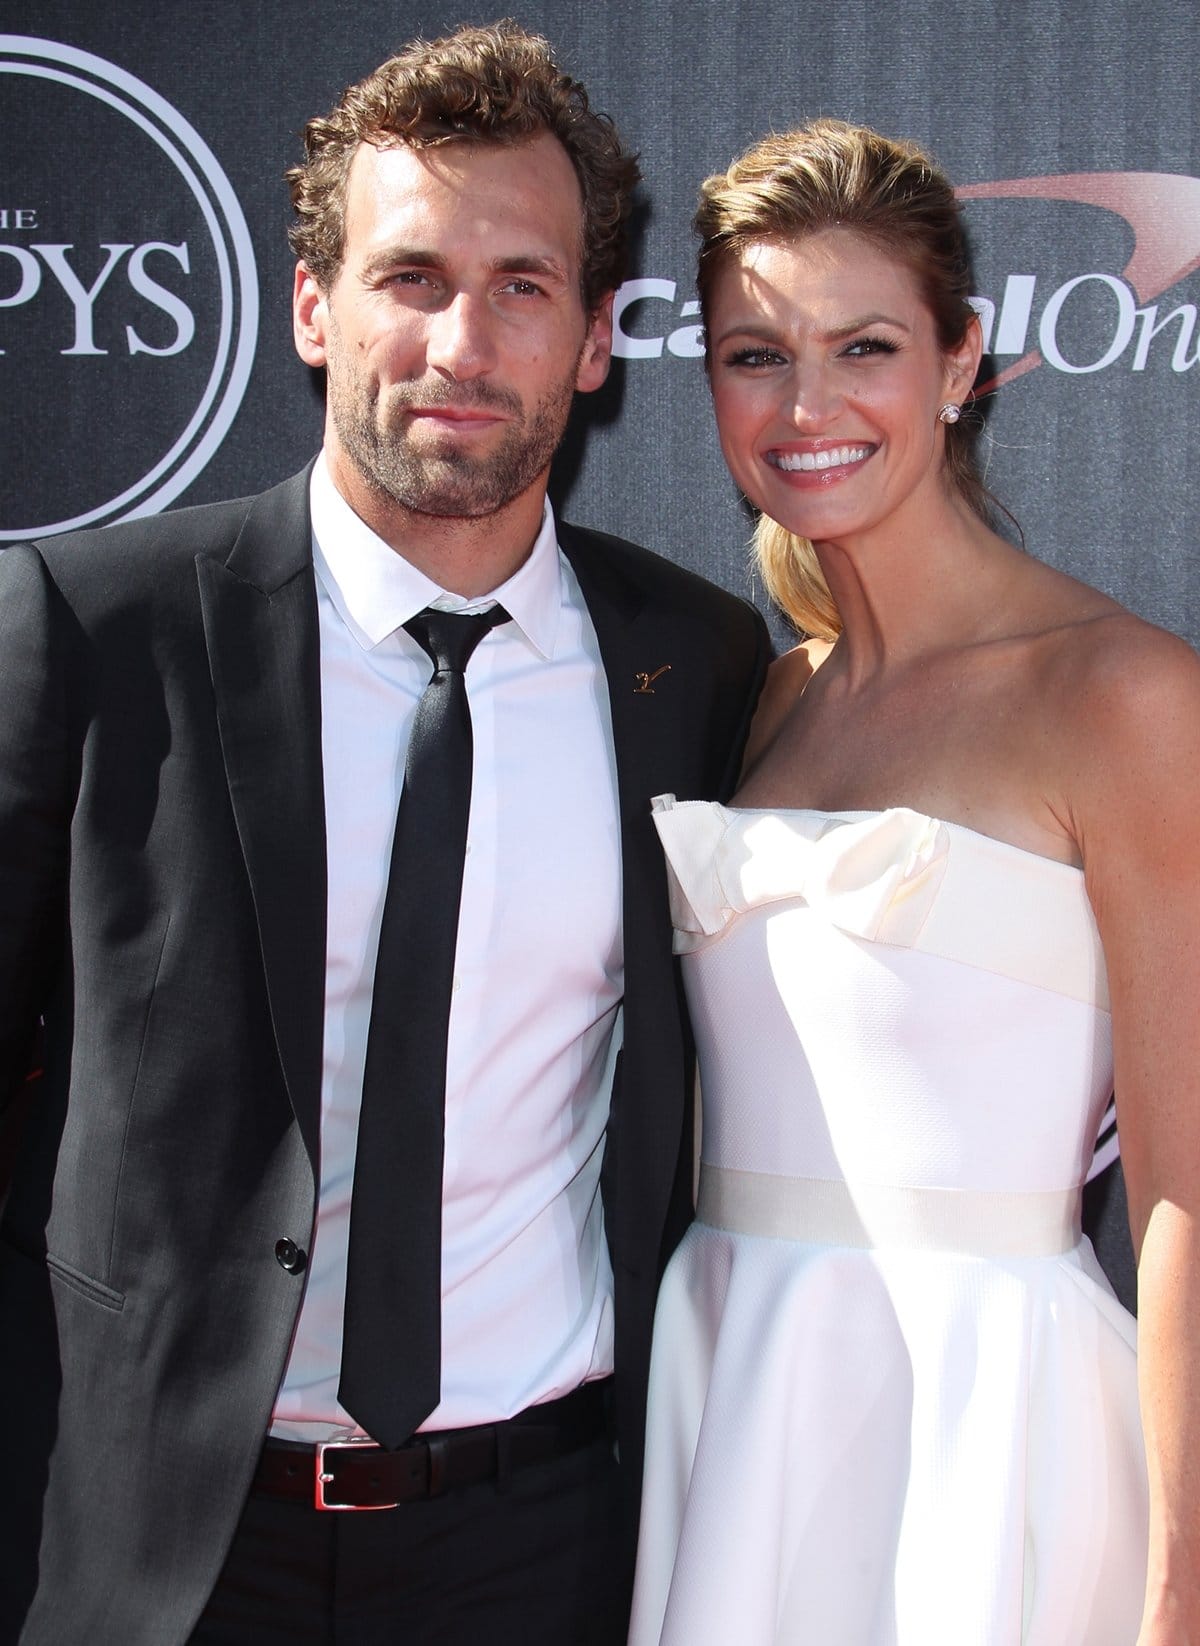 Erin Andrews and Jarret Stoll married in a ceremony in Montana in June 2014 in front of a small group of friends and family